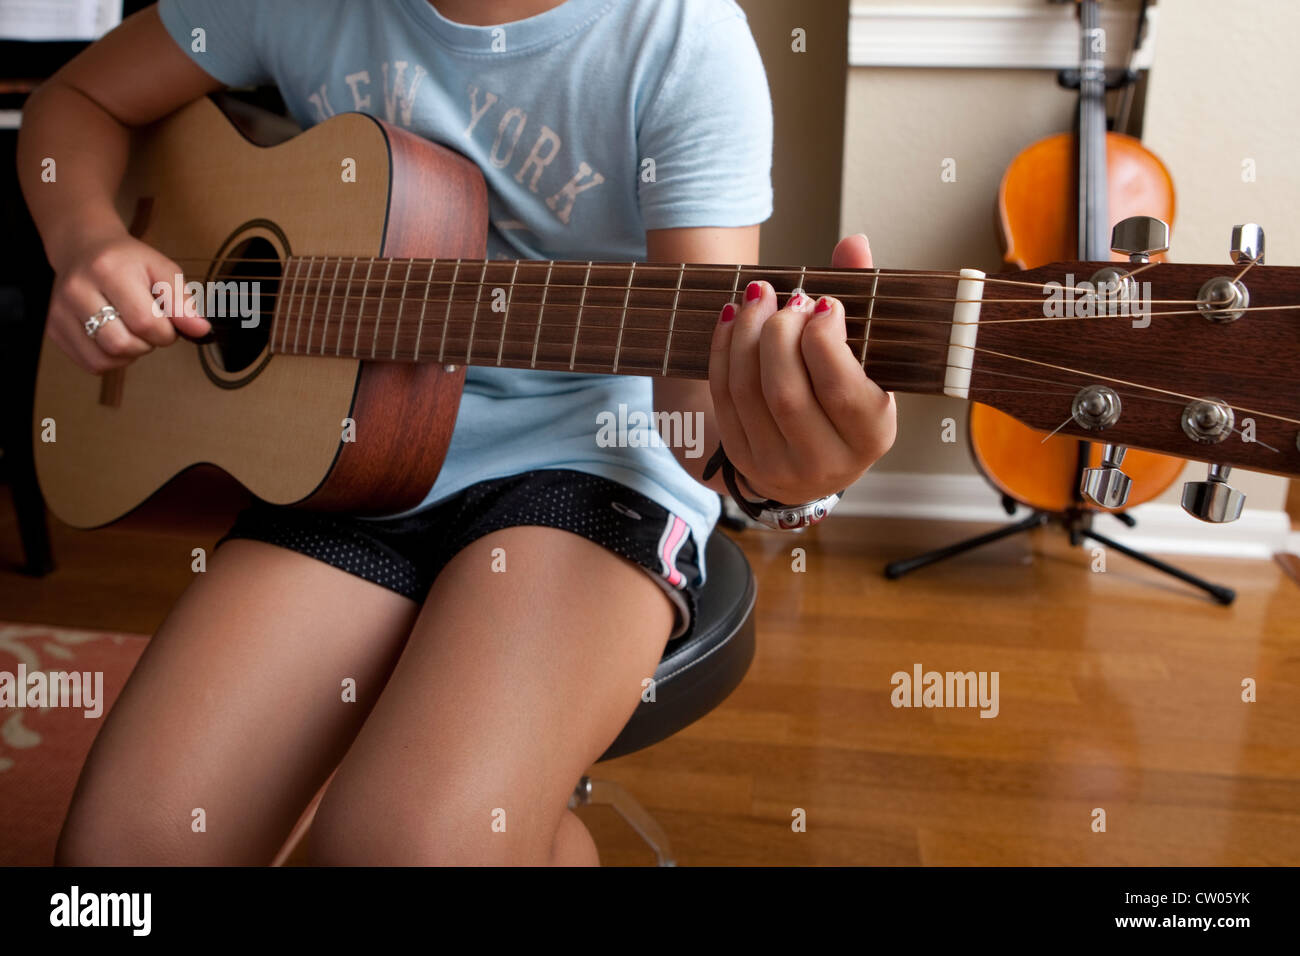 Japanese-American 10 year old girl practices playing guitar, uses sheet music while at home. Stock Photo